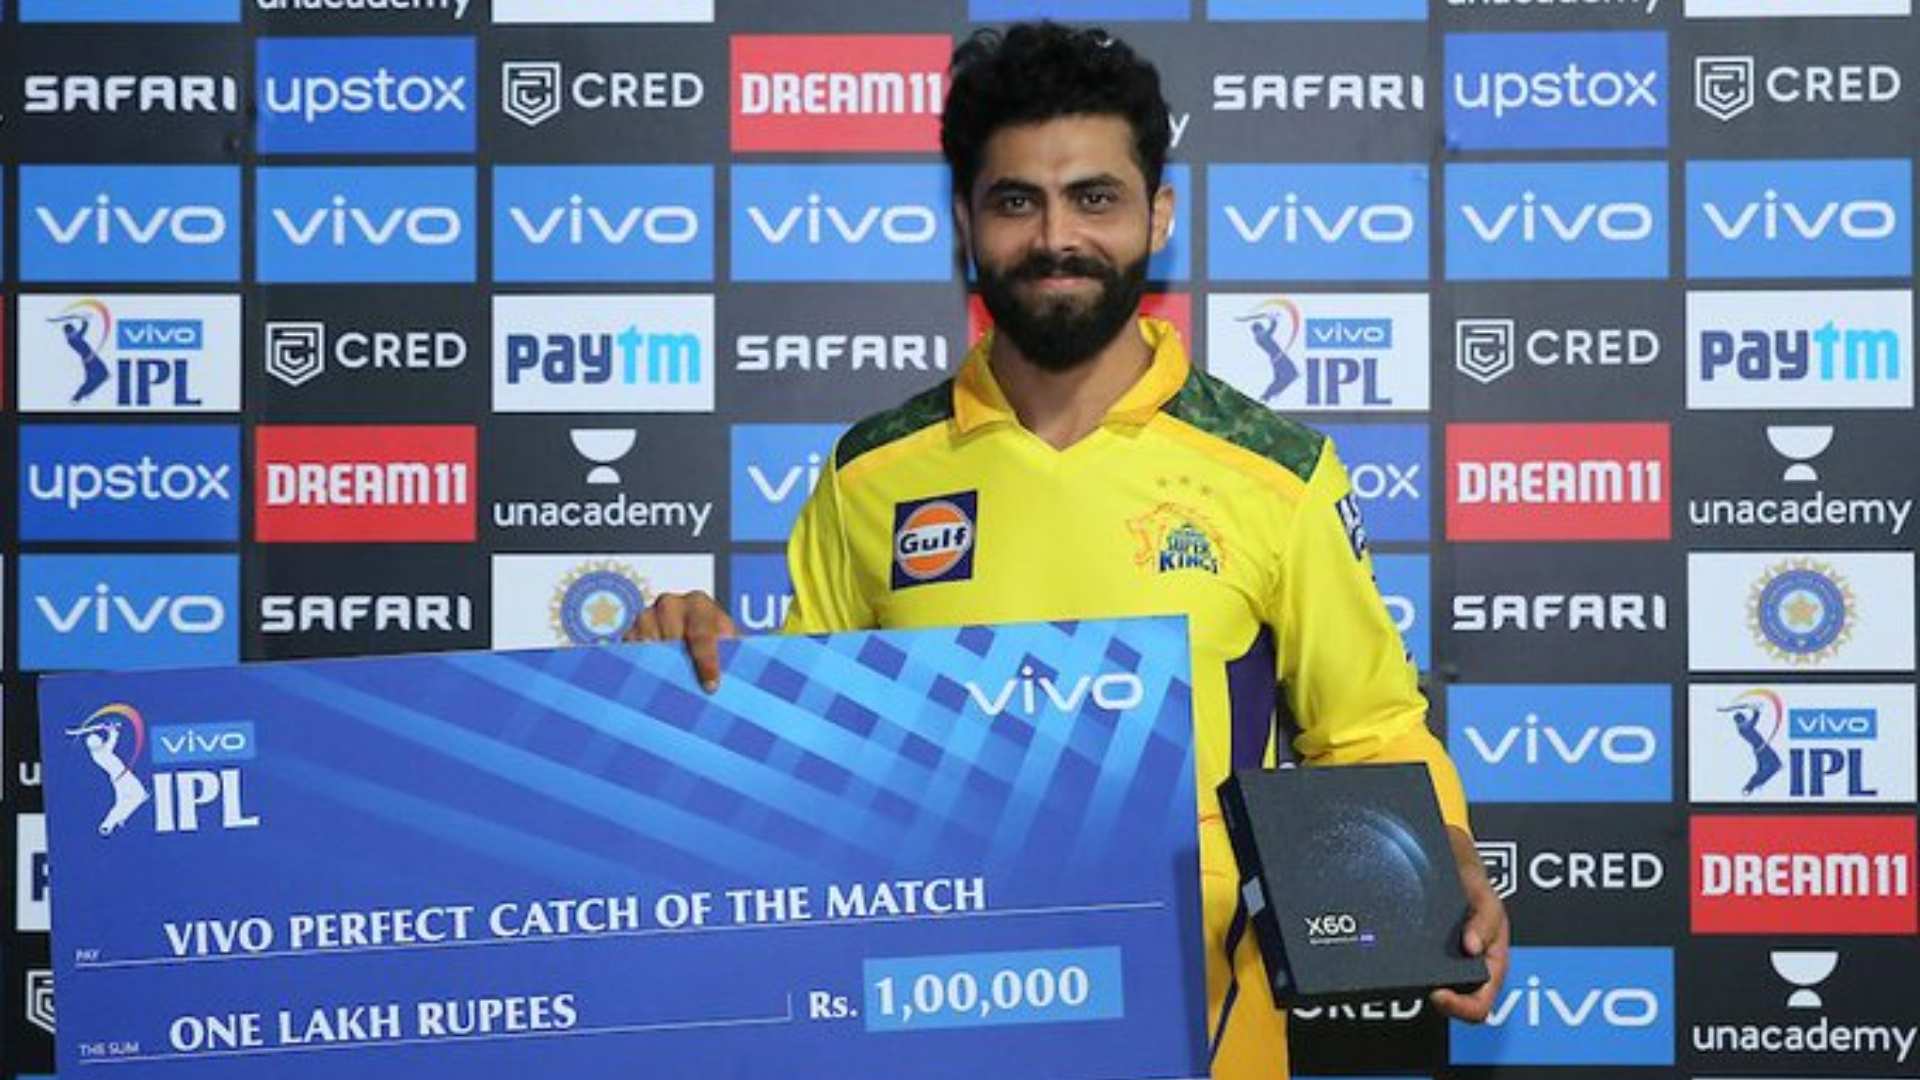 Ravindra Jadeja took a brilliant catch off Chris Gayle and also effected the run-out of KL Rahul.